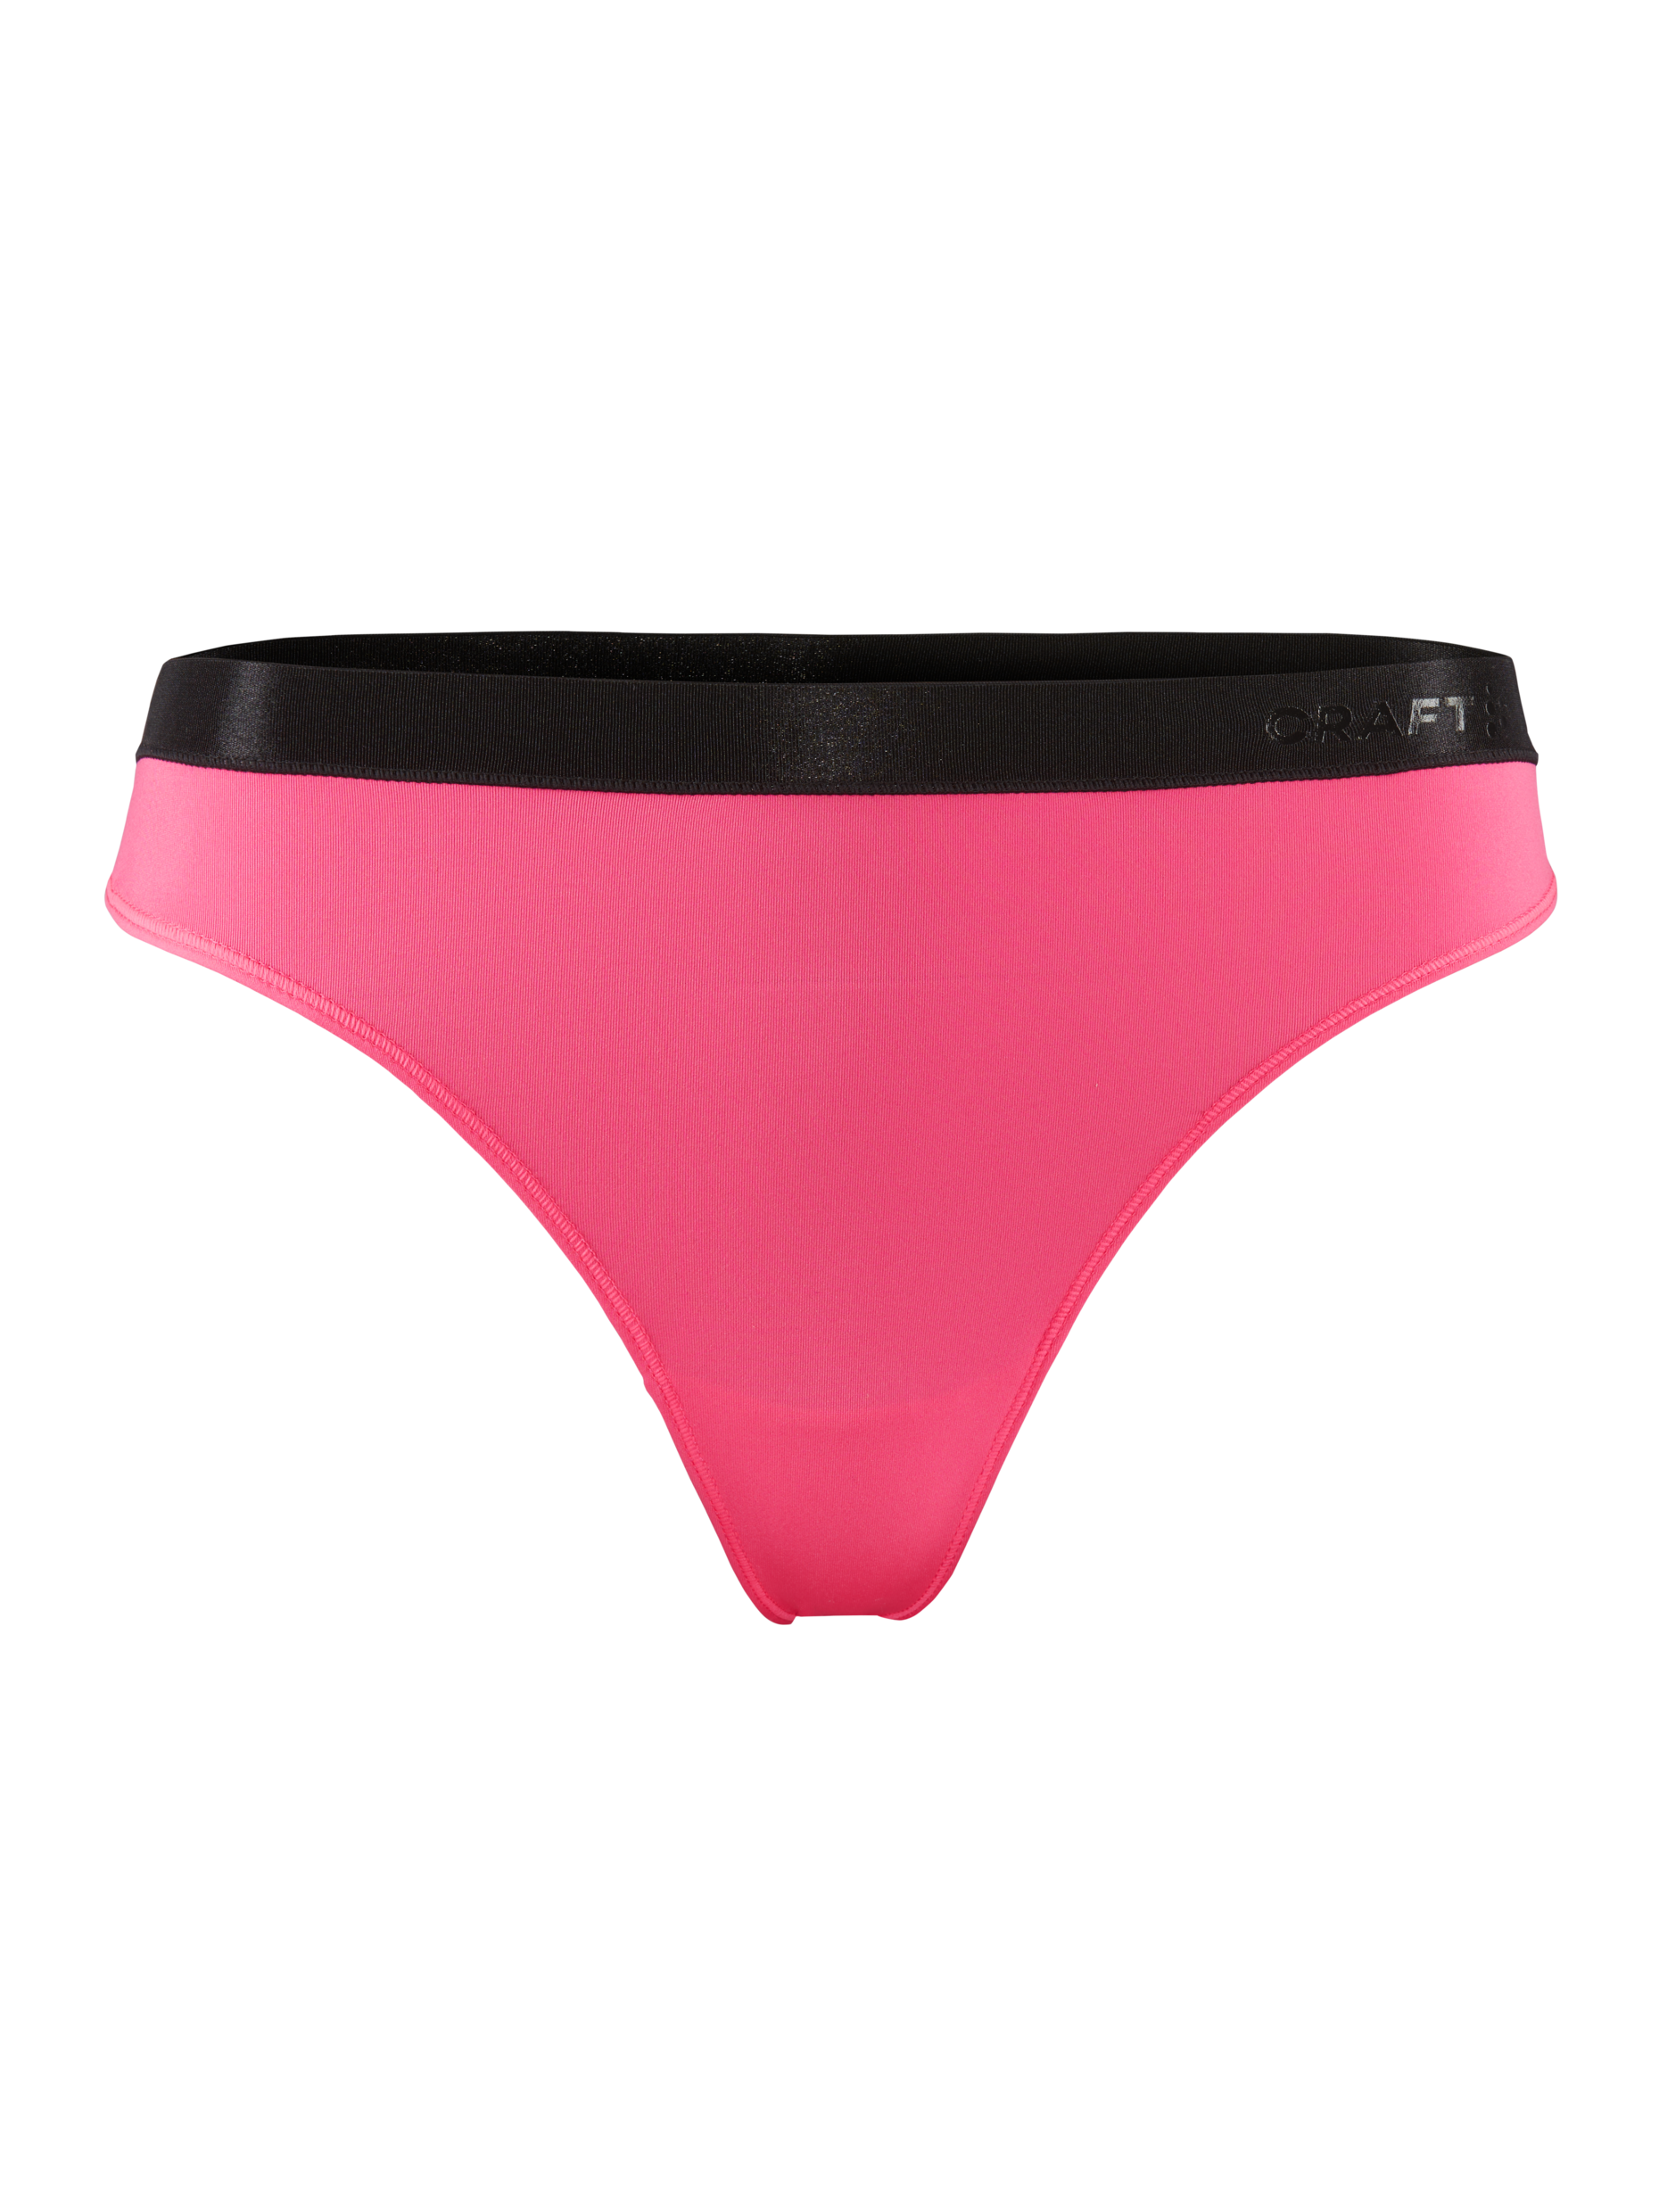 CORE Dry String W - Pink